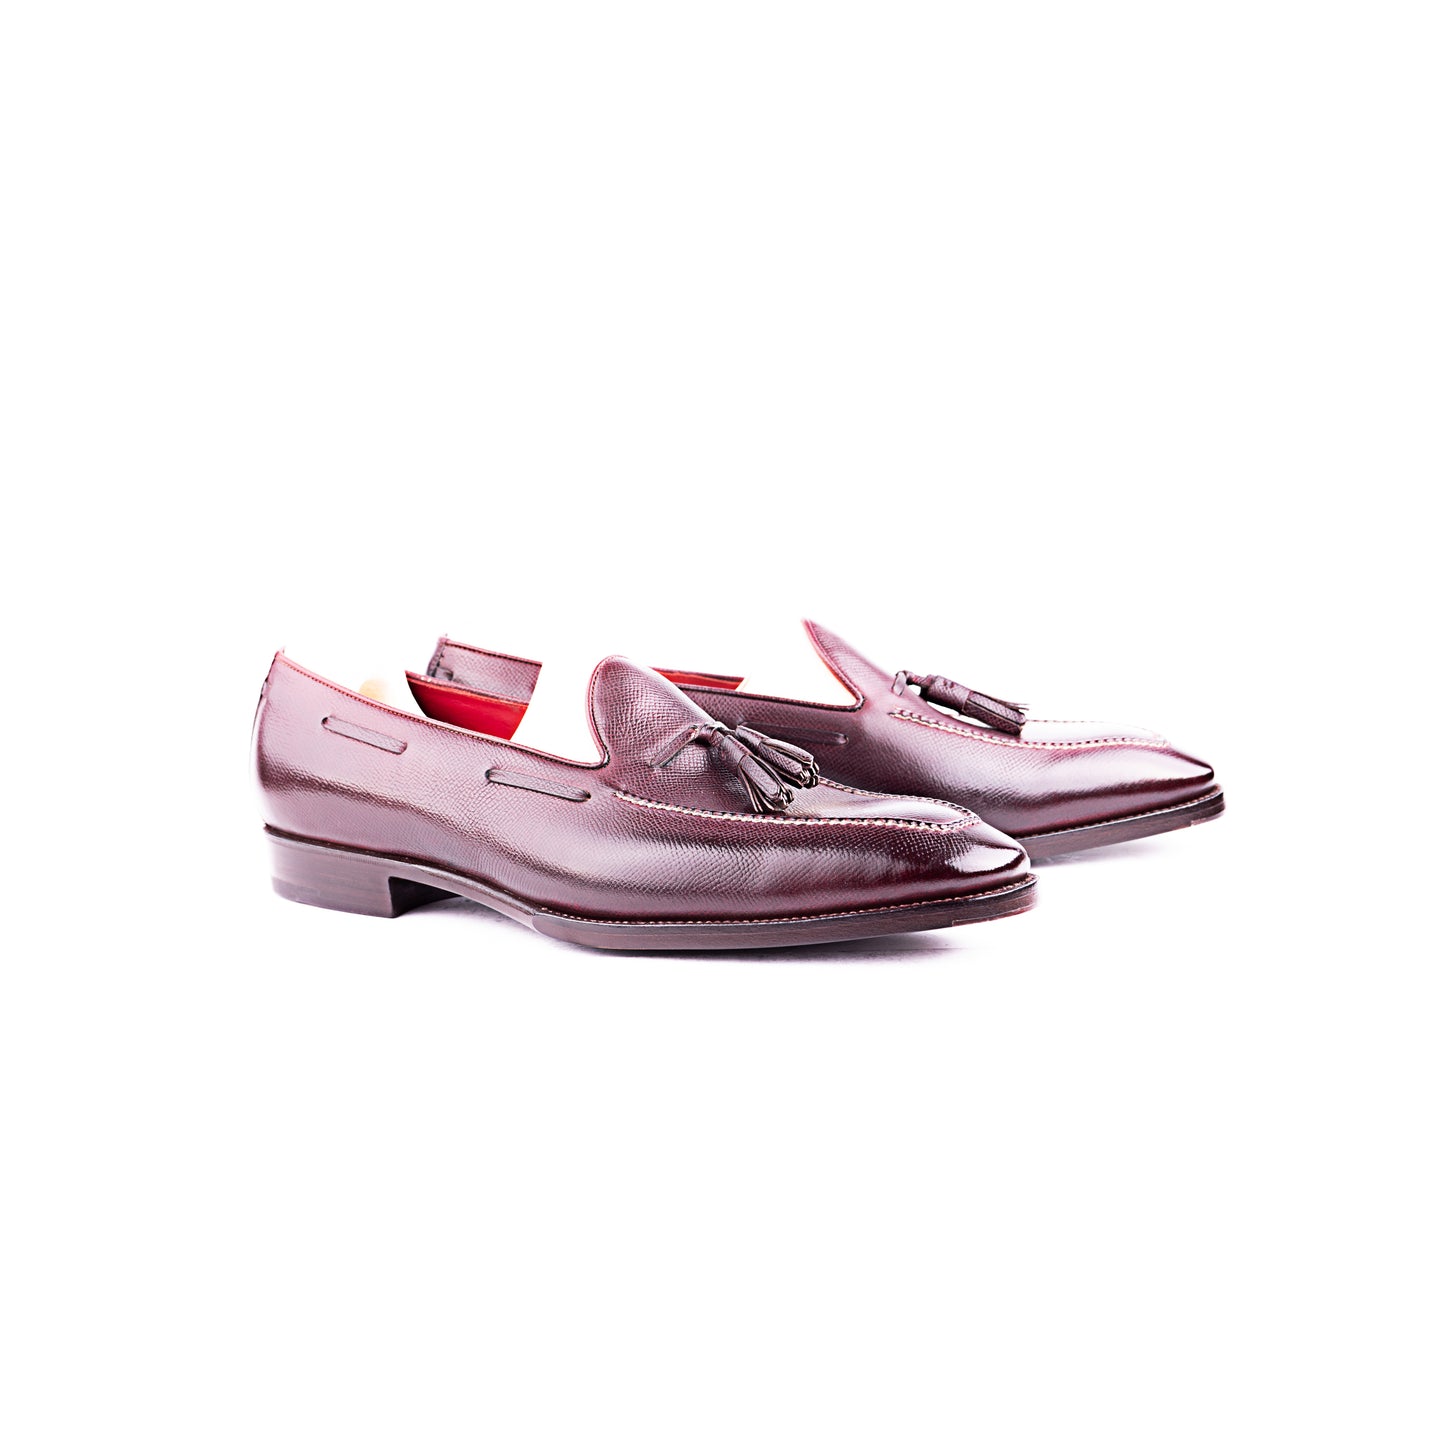 Tassel loafer with hand stitched apron, squared tip for chiseled lasts - 10.5F